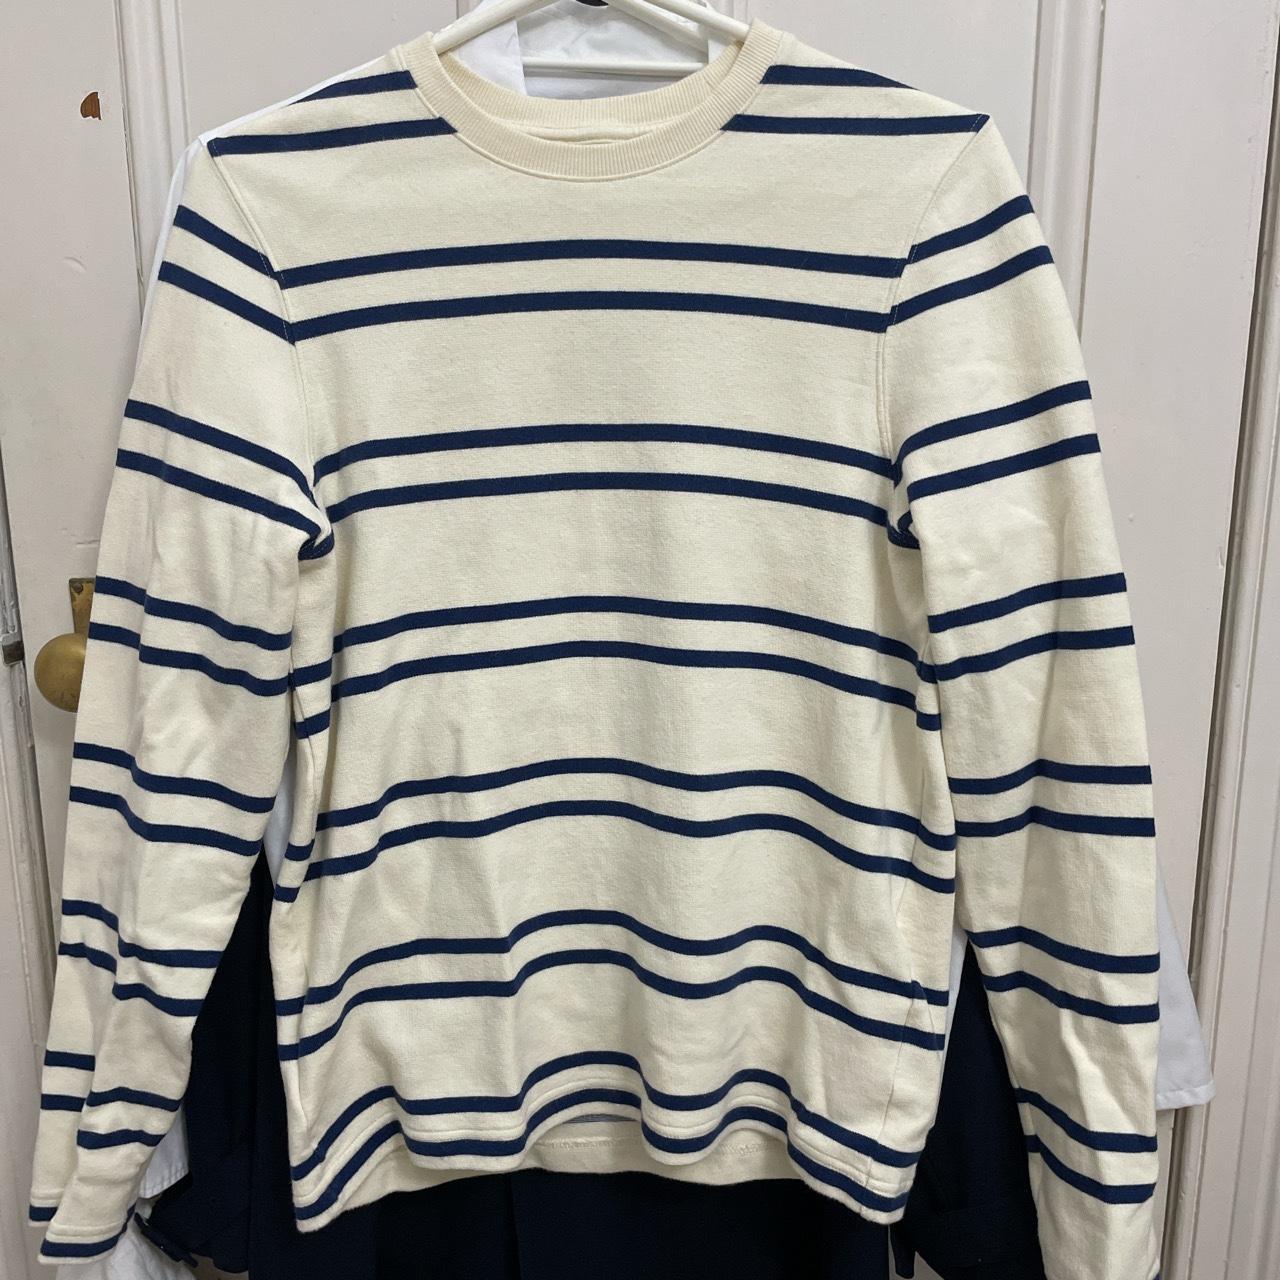 Super soft Country Road striped sweater. Cream and blue - Depop